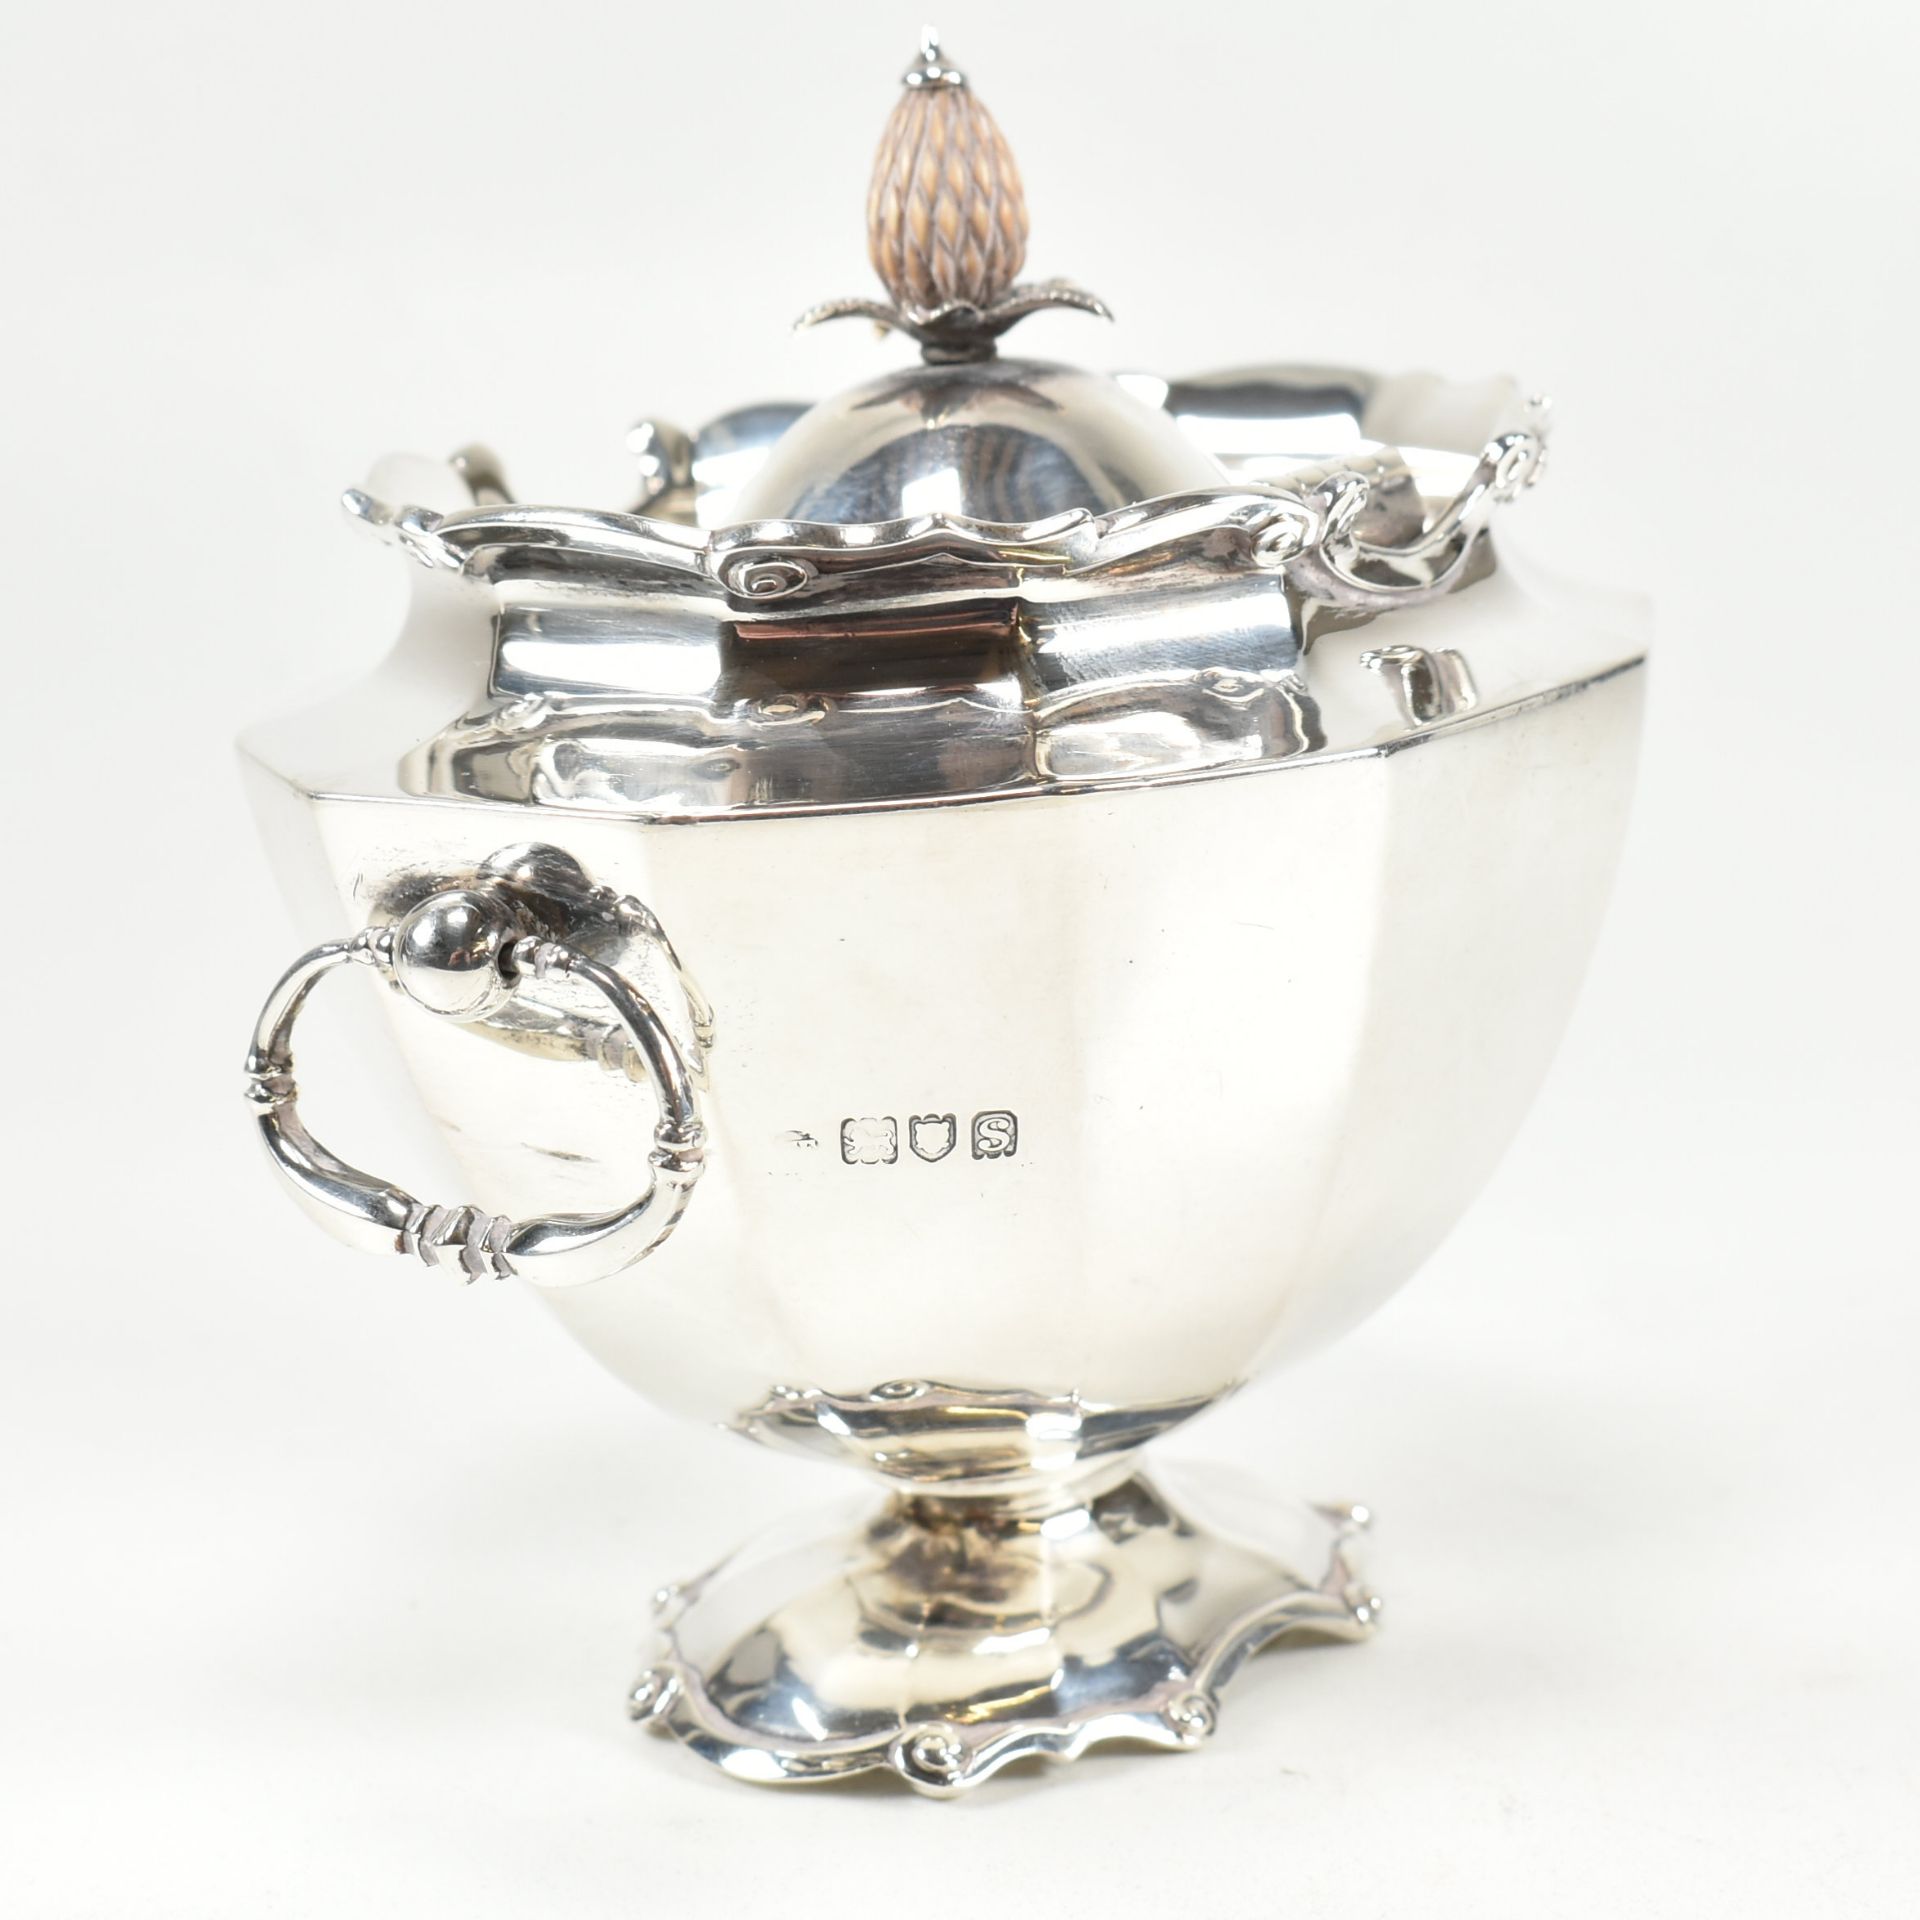 EARLY 20TH CENTURY HALLMARKED SILVER TEA CADDY - Image 7 of 8